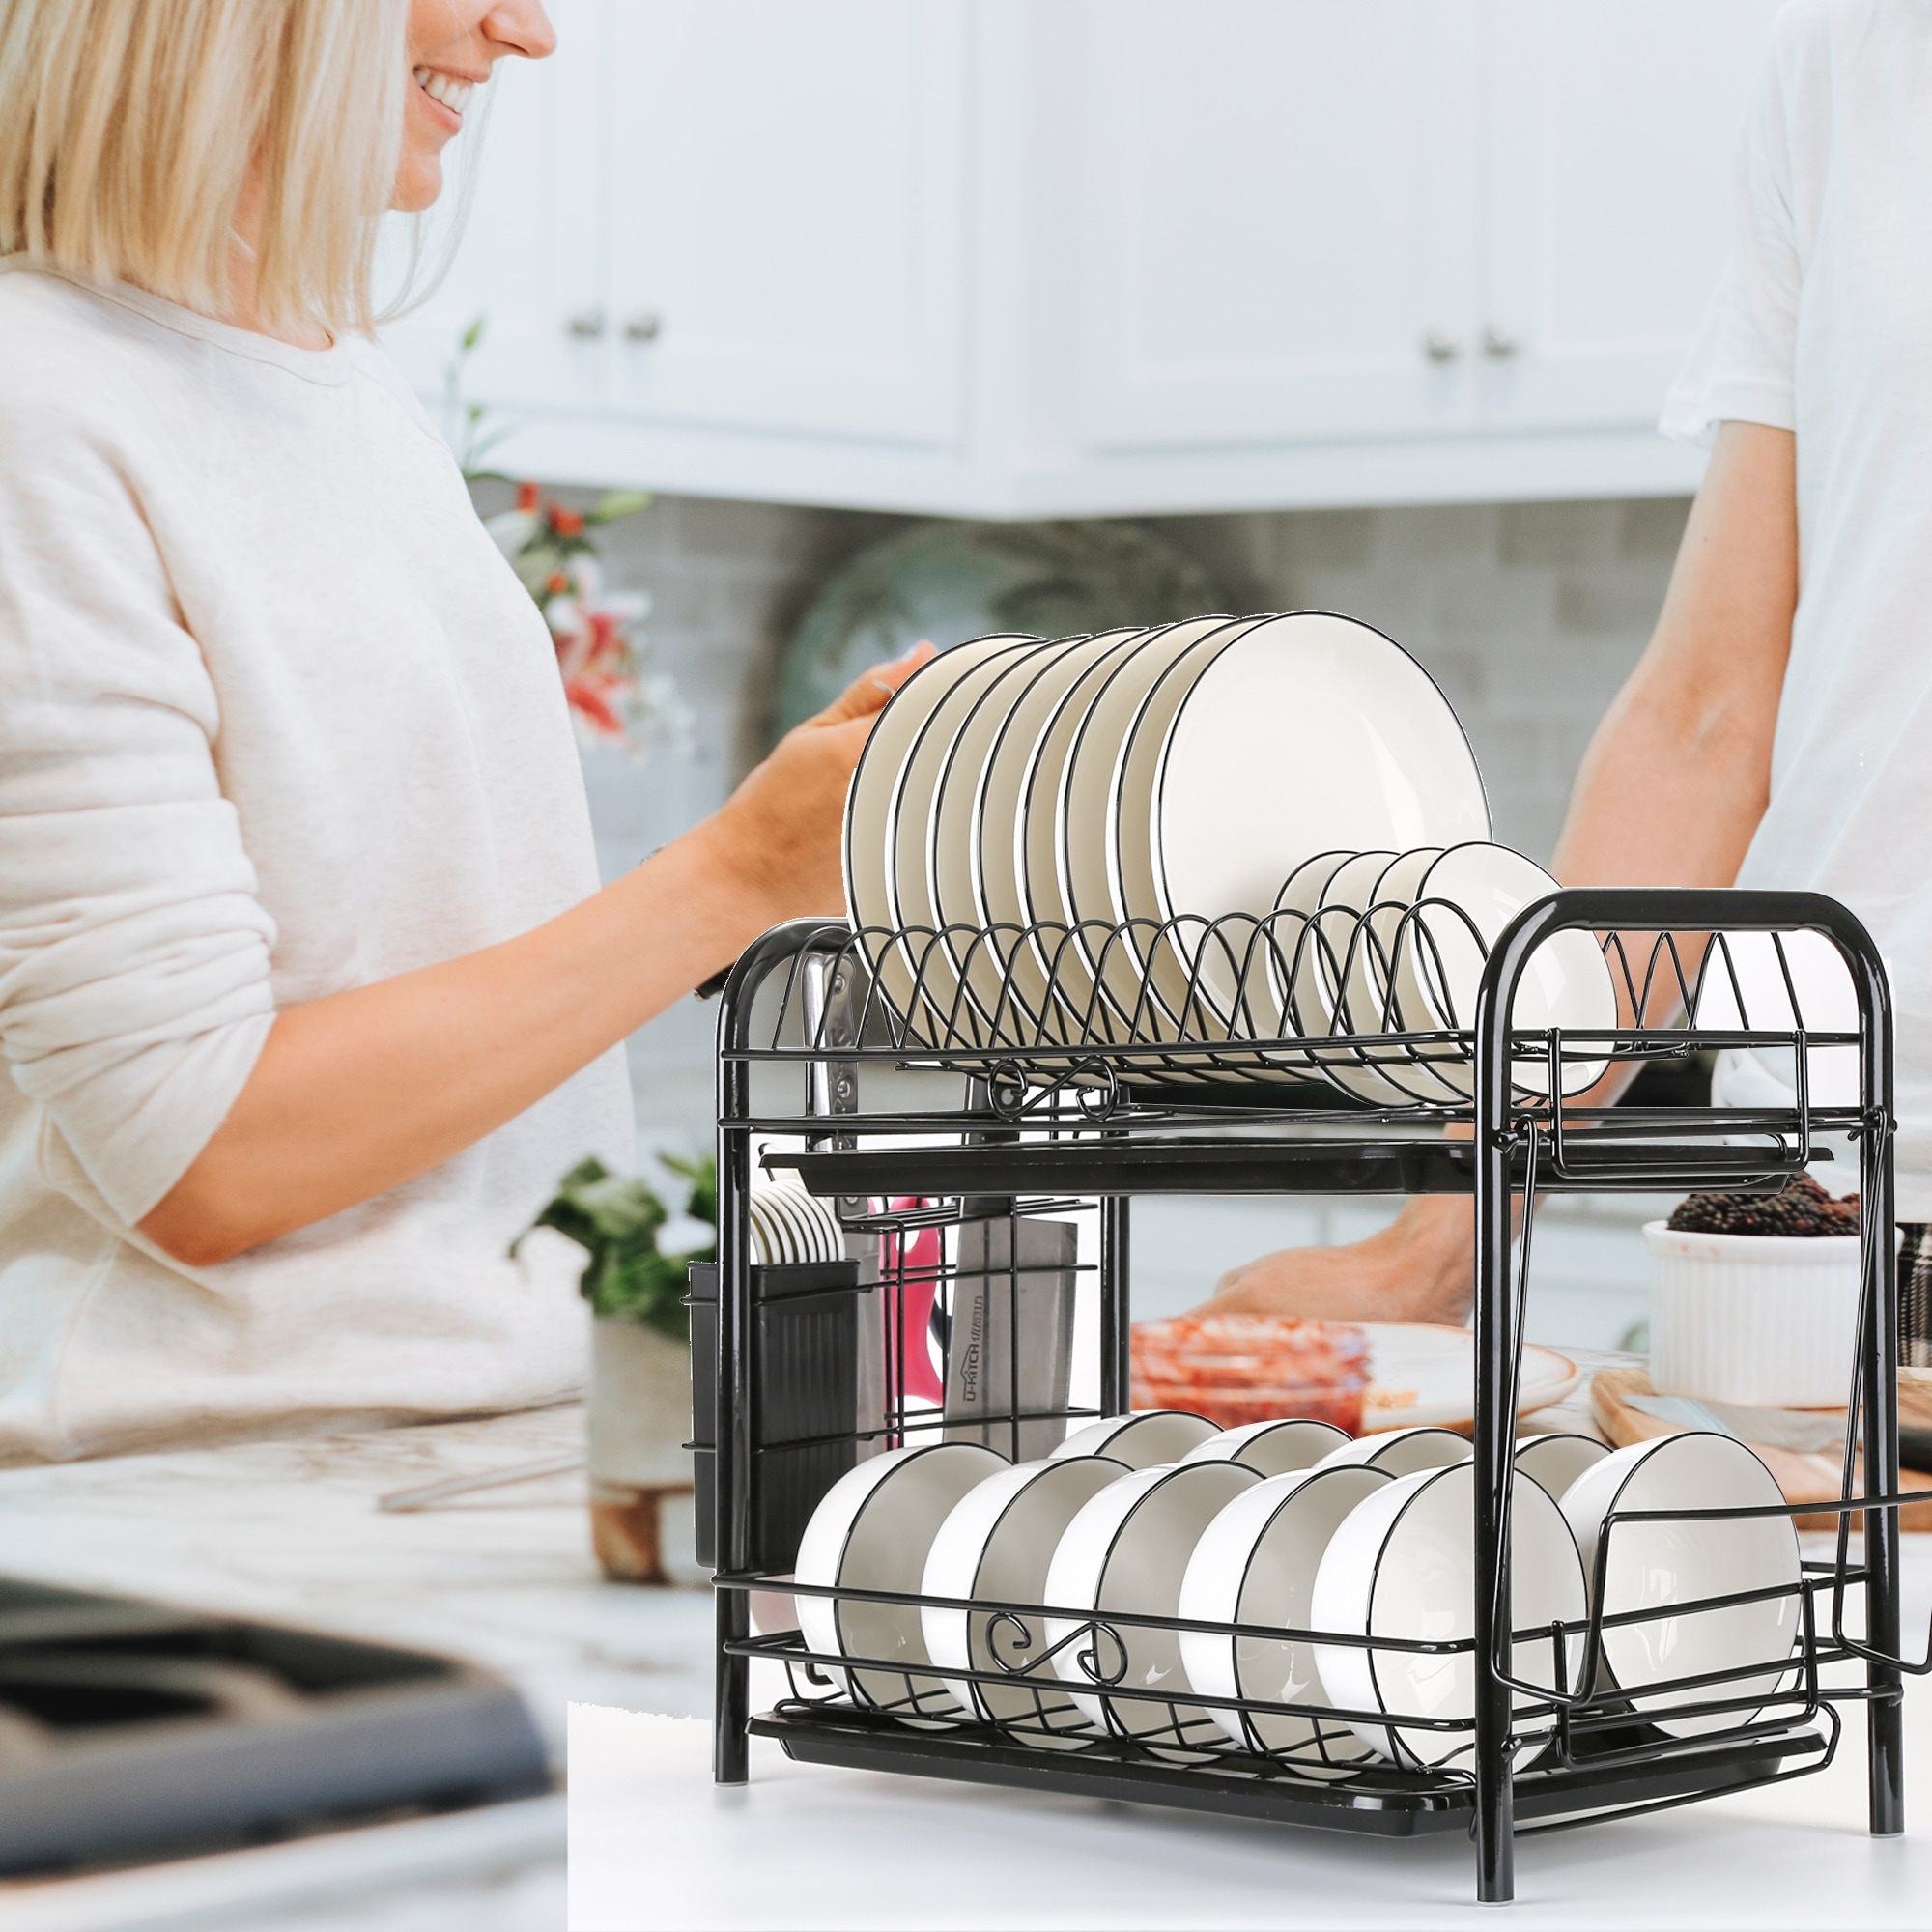 https://ak1.ostkcdn.com/images/products/is/images/direct/239808f7cf934850ff15354a43b02e88c072b5f2/Large-Capacity-Dish-Drying-Rack-Over-The-Sink-Roll-Up-2-Tier-Kitchen-Storage.jpg